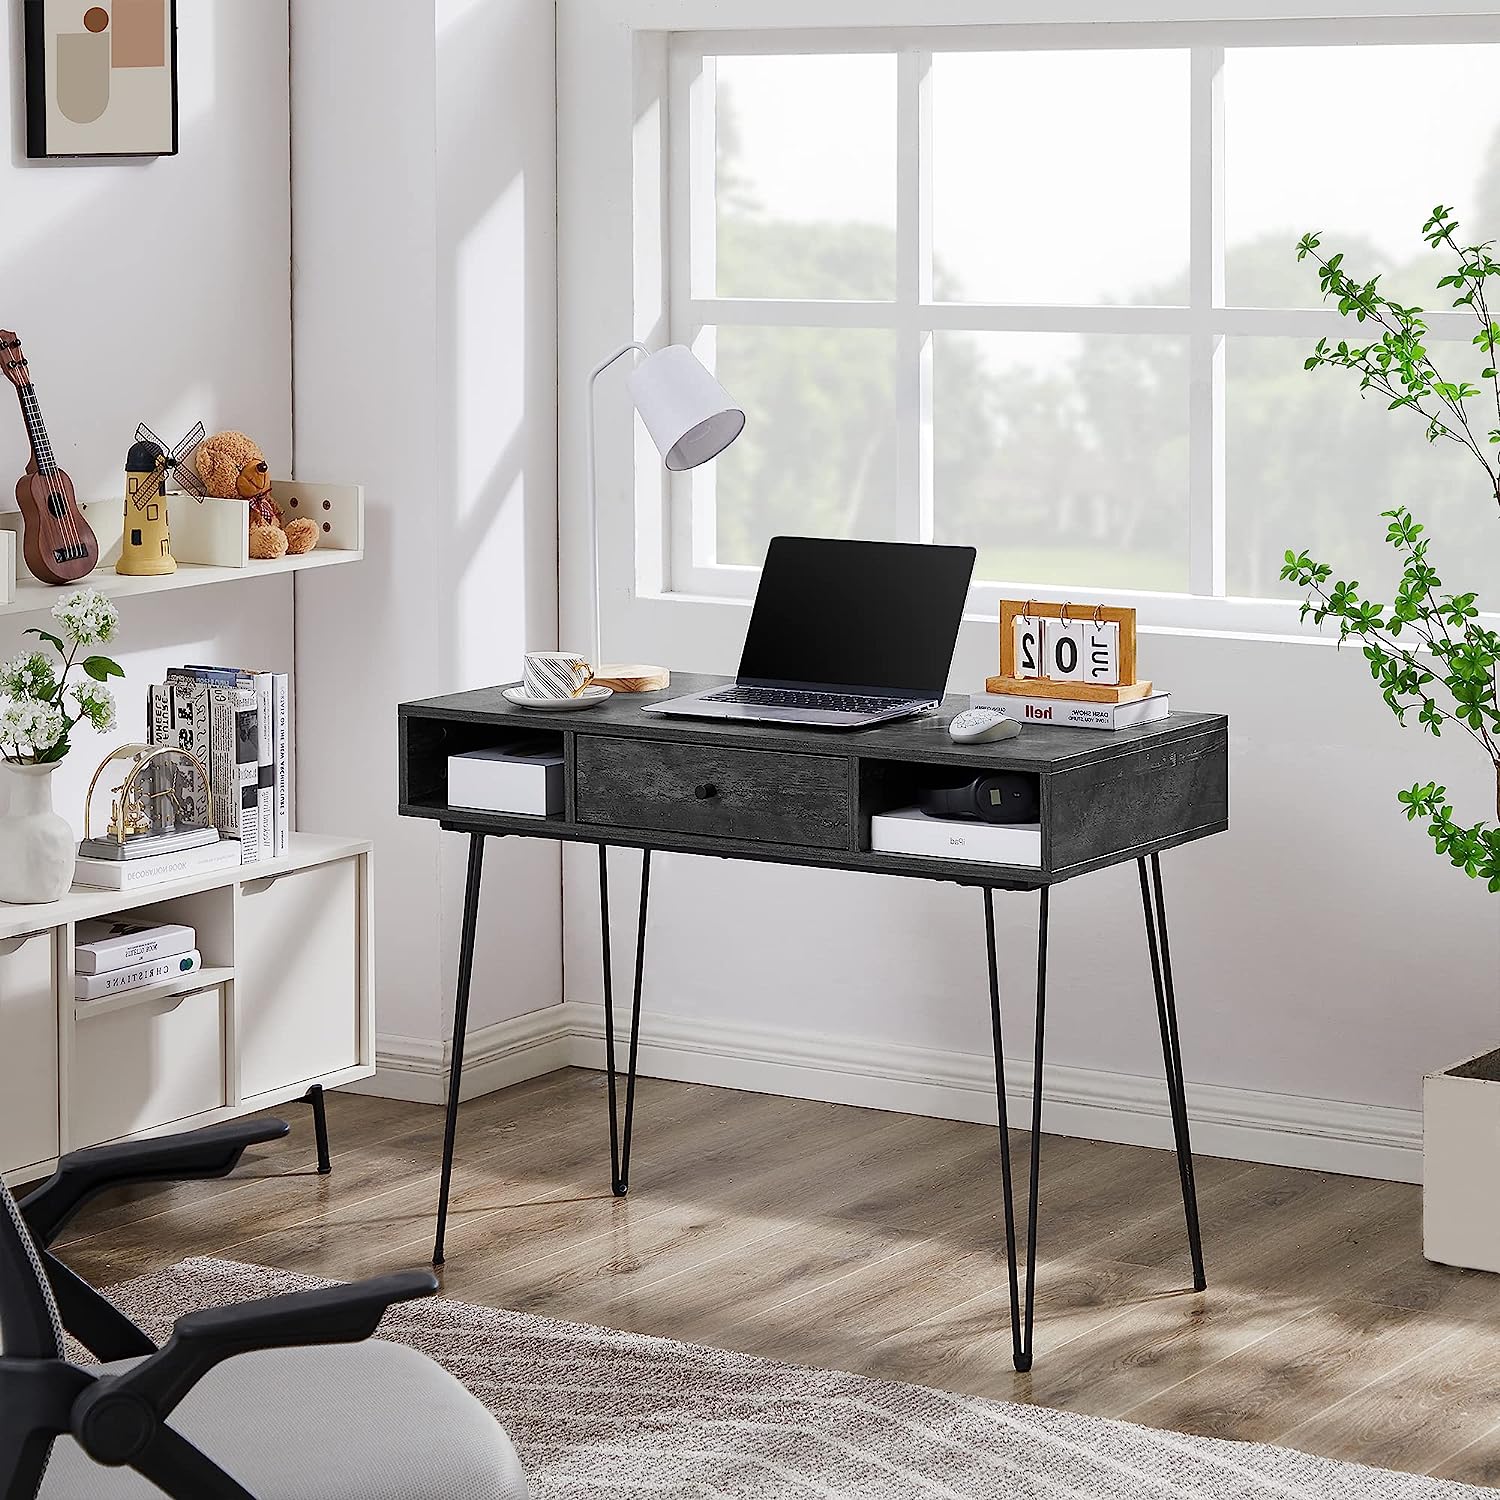 VECELO Computer Home & Office Laptop Table Study Writing Desk with Drawers Retro Brown